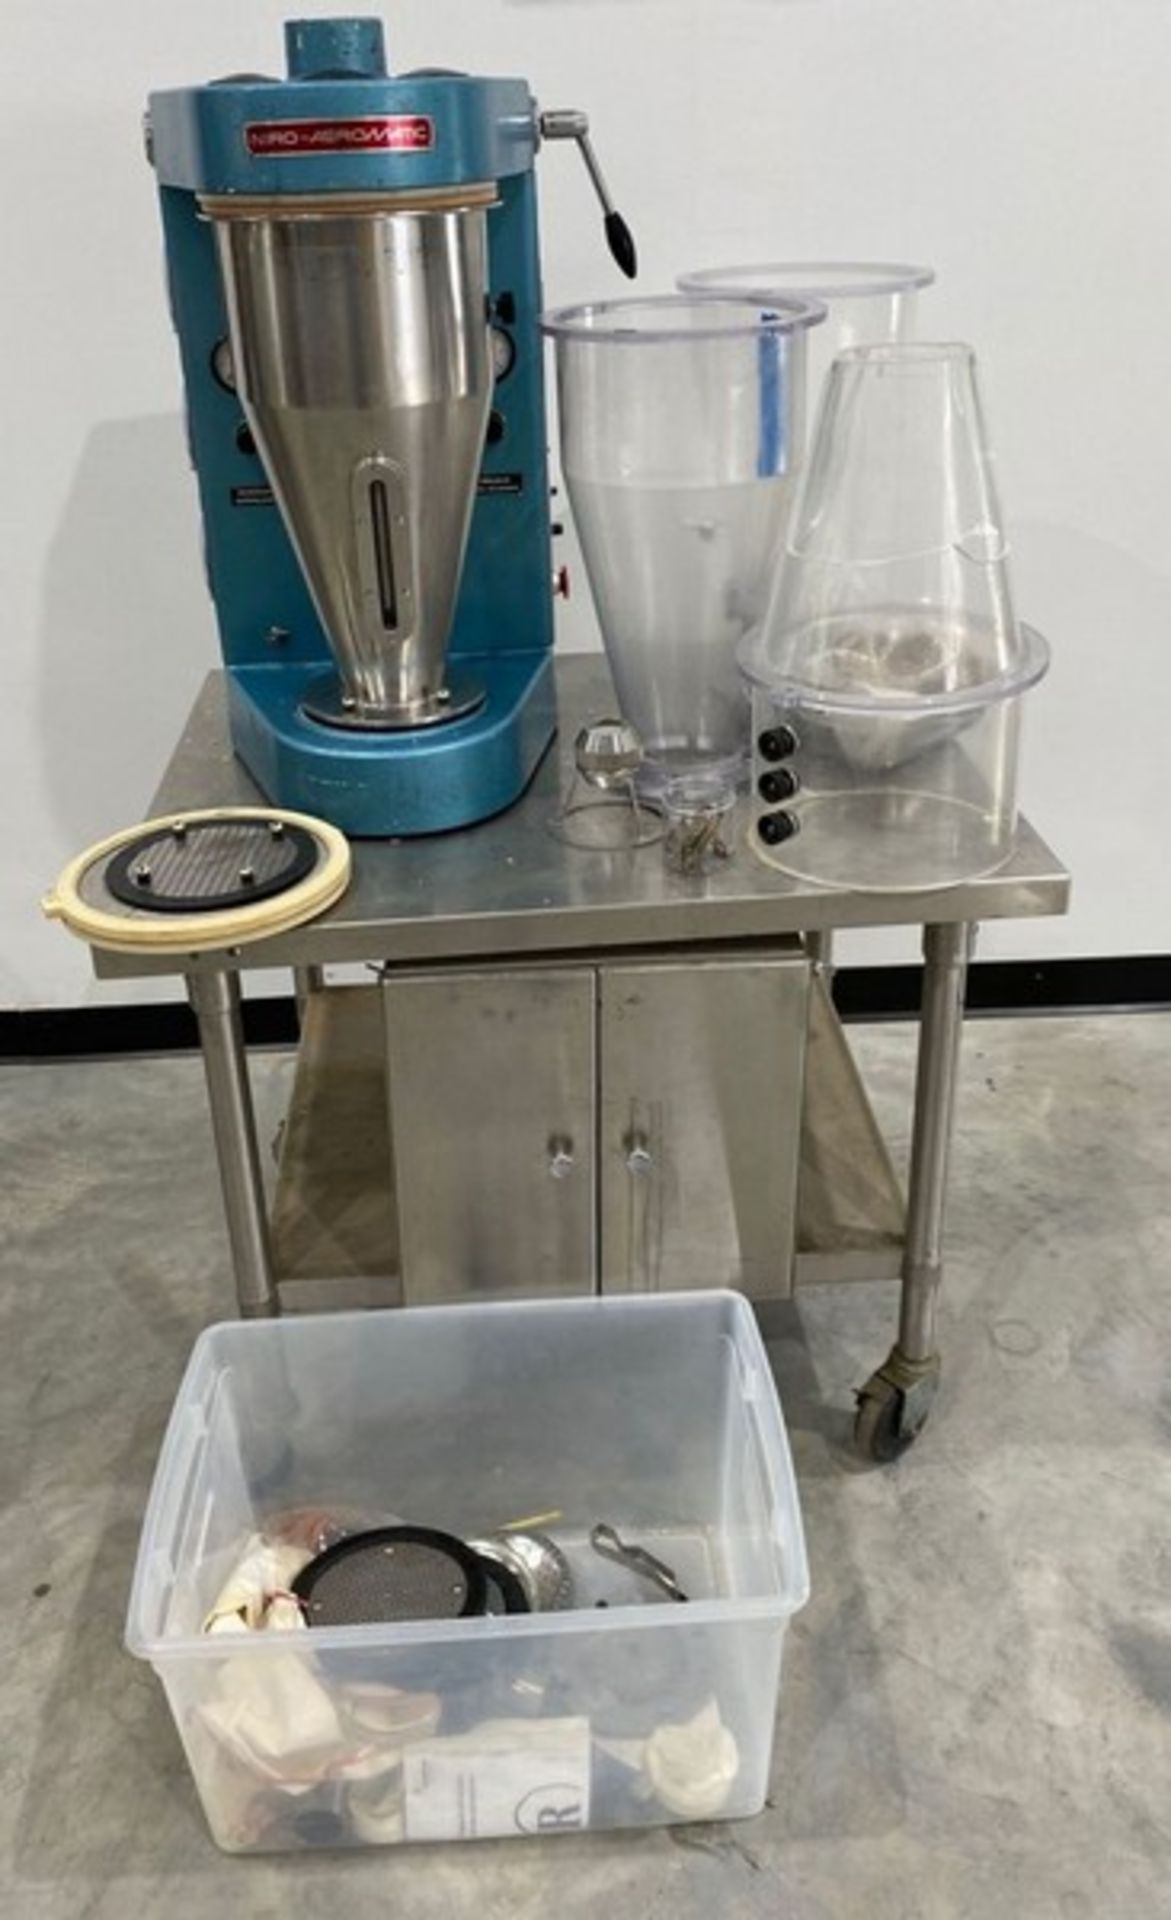 Aeromatic Strea1 Fluid Bed Dryer. Serial: 94900250, Unit comes with 4 bowls, 3 Acrylic, 1